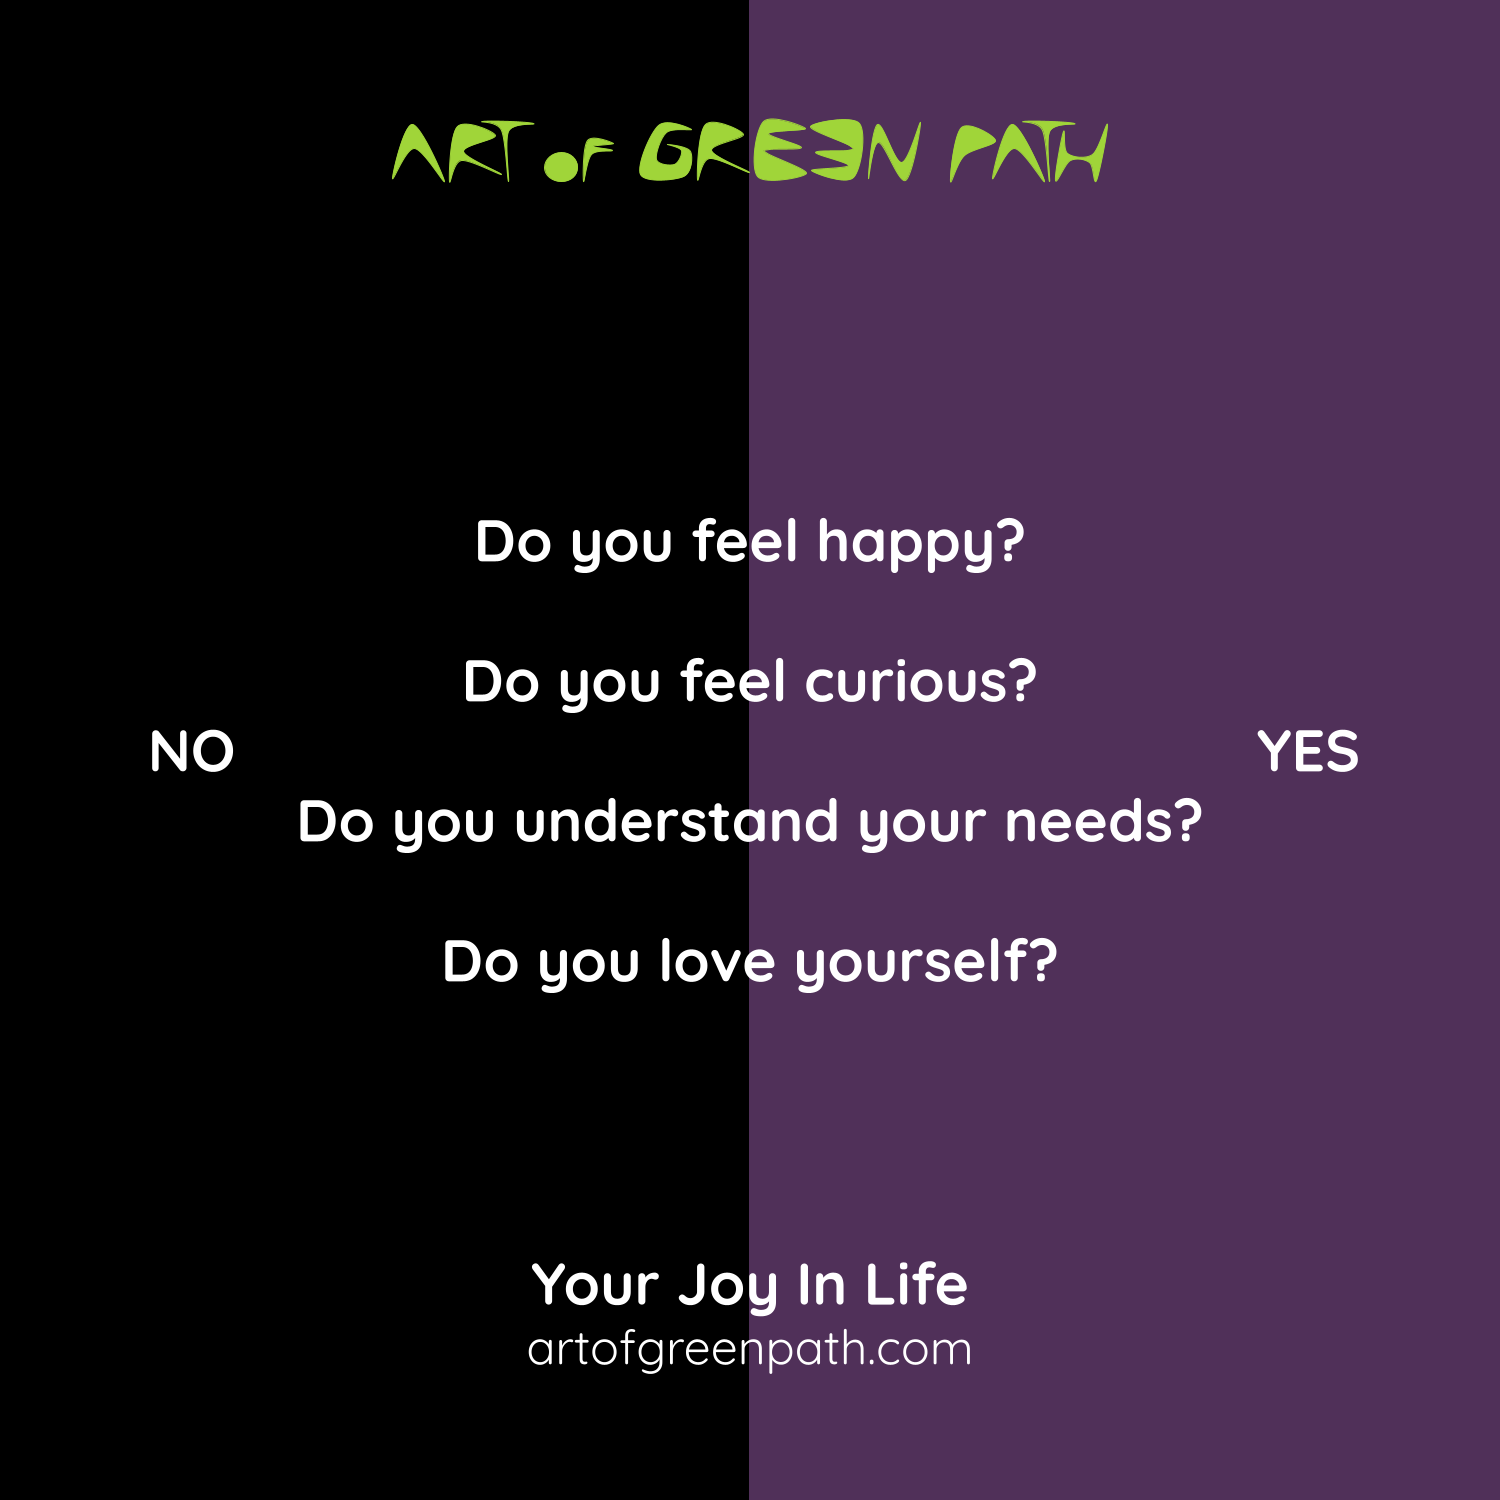 Art Of Green Path - Your Joy In Life in 4 Questions